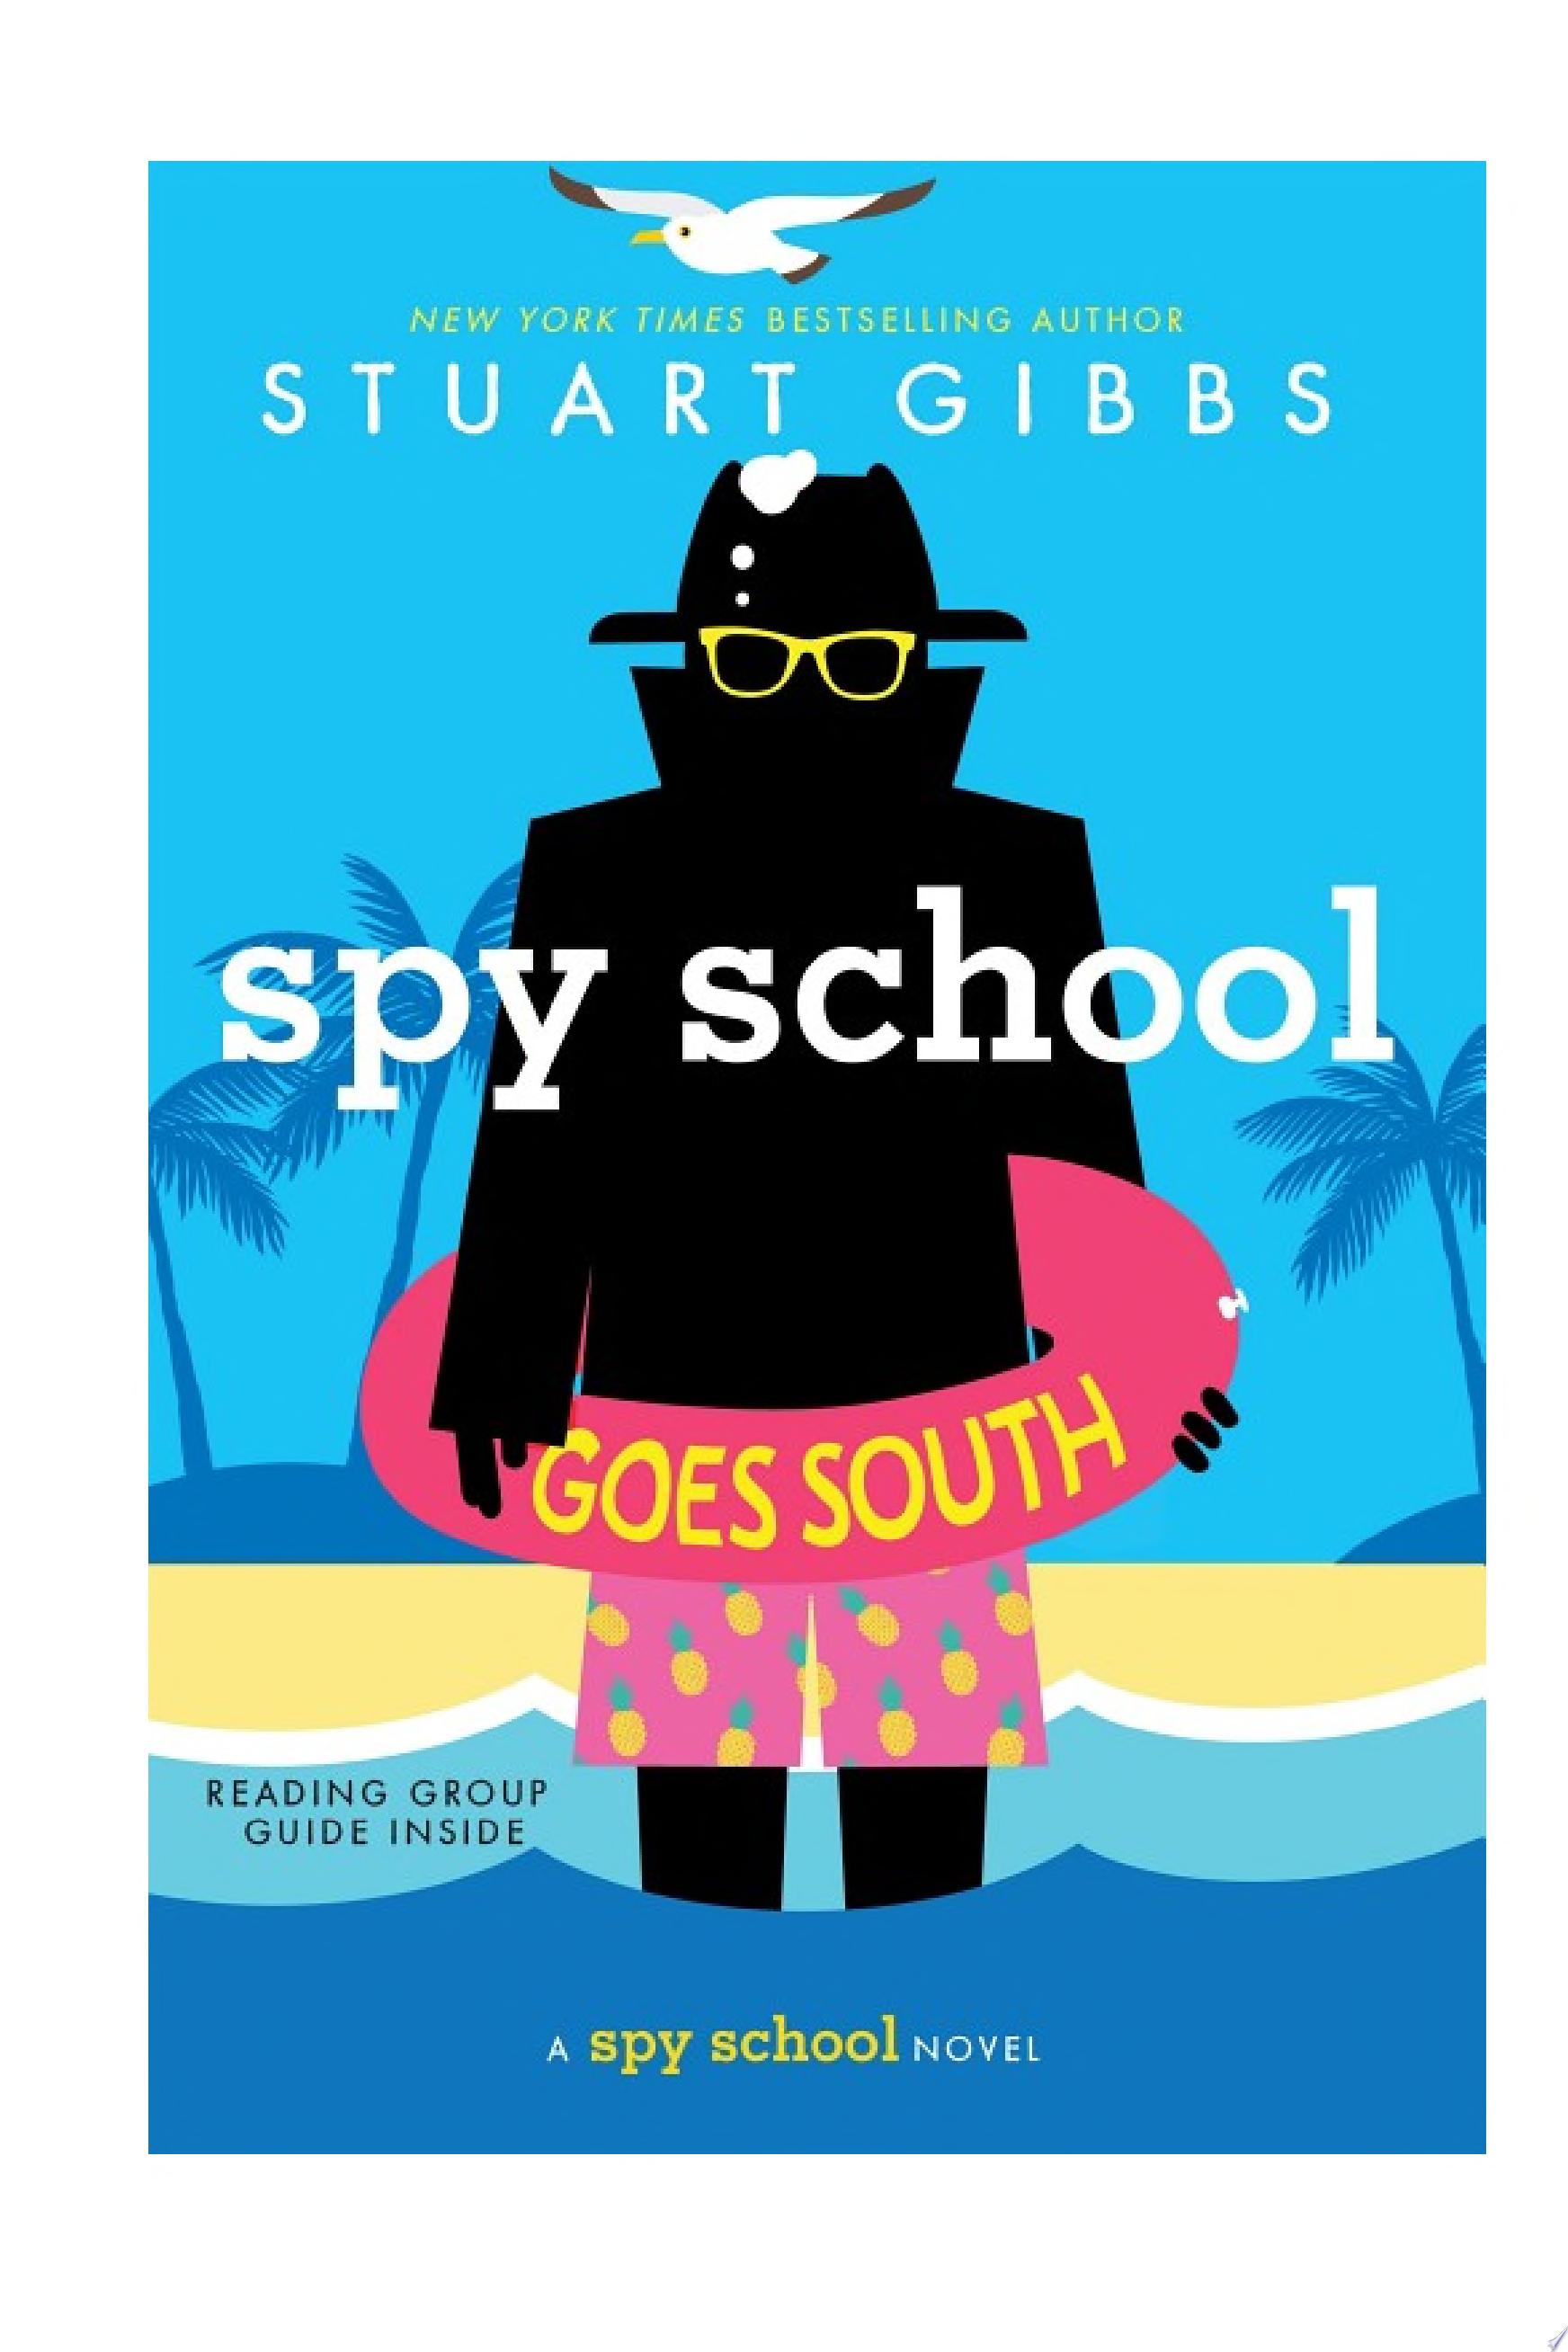 Image for "Spy School Goes South"